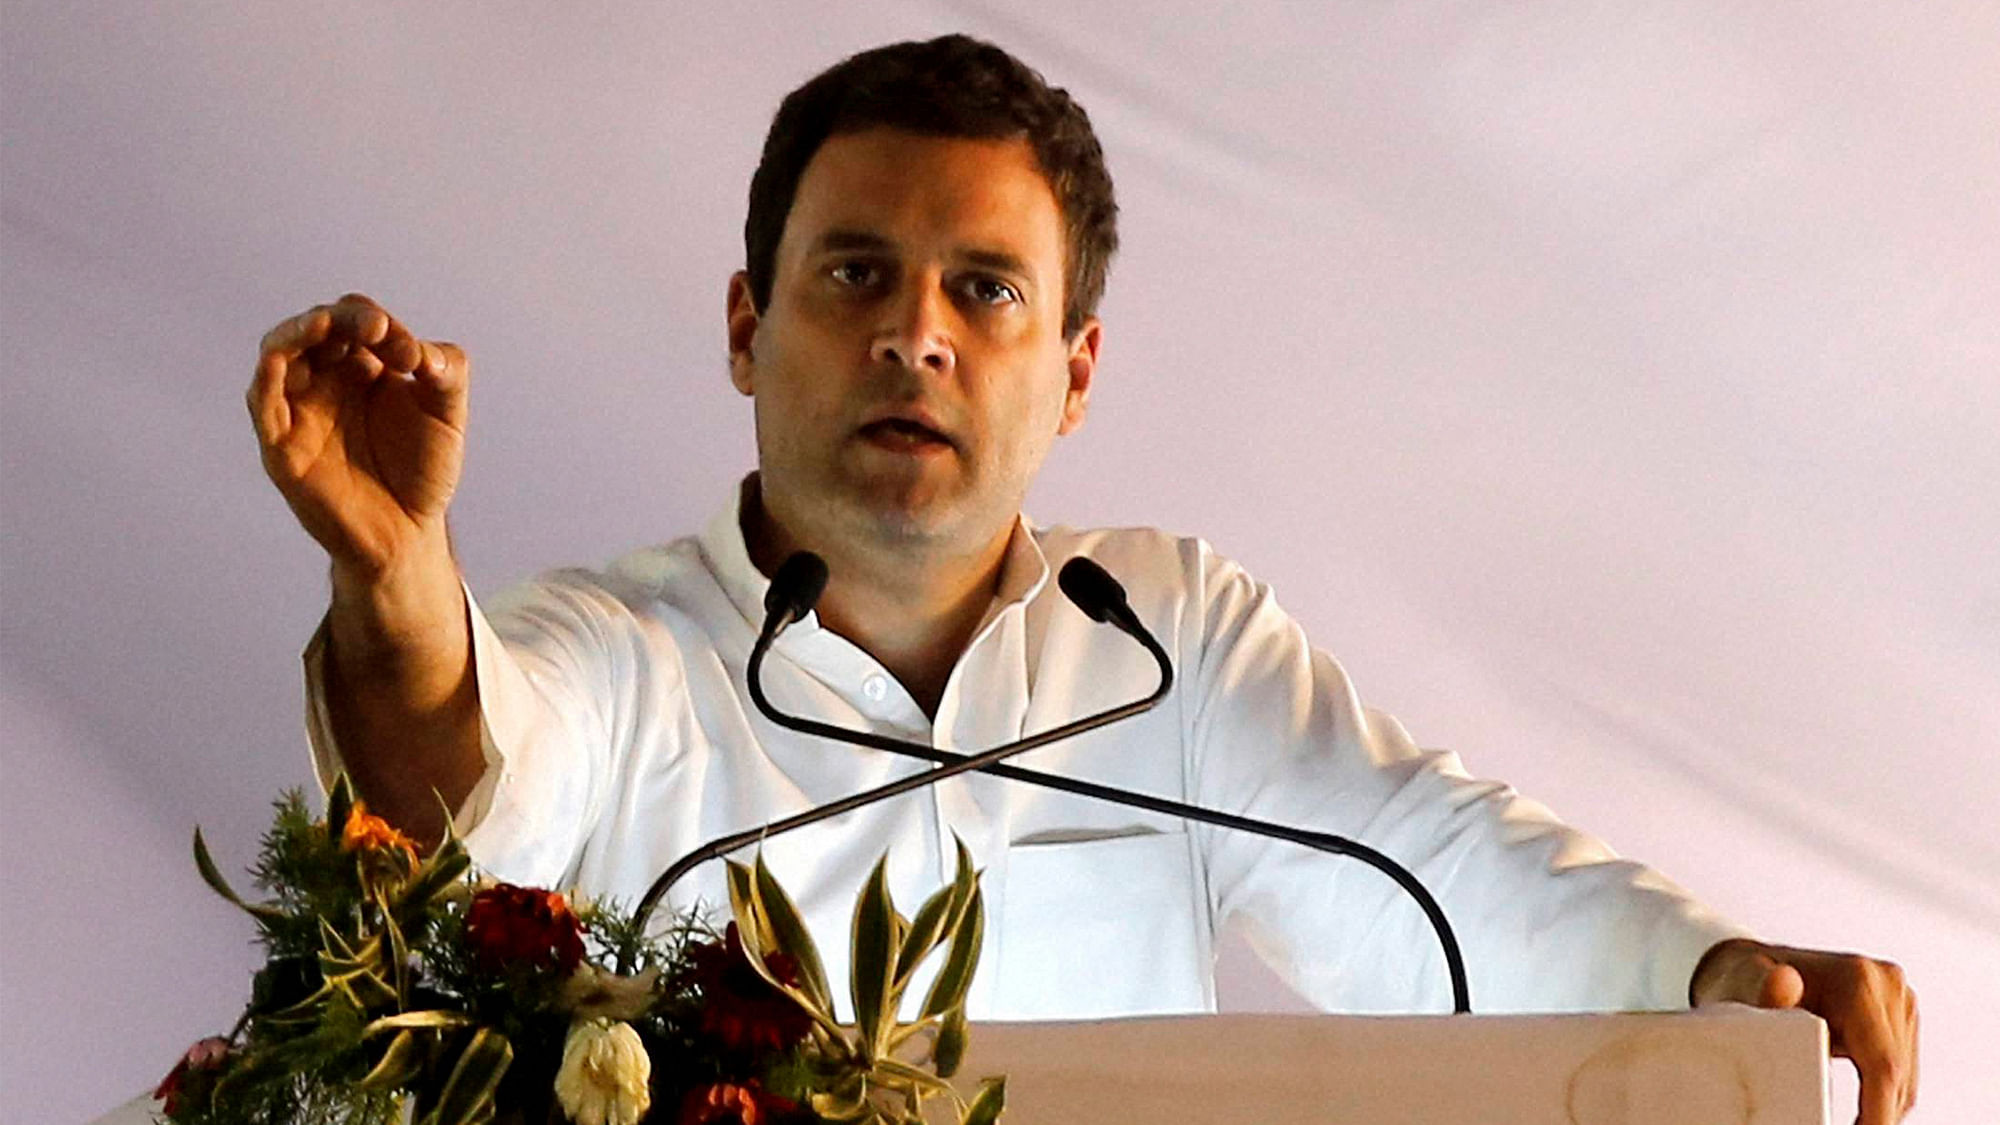 Congress Party Vice President Rahul Gandhi addresses a public meeting to mark culmination of 125th birth anniversary celebrations of Dr Ambedkar. (Photo: PTI)